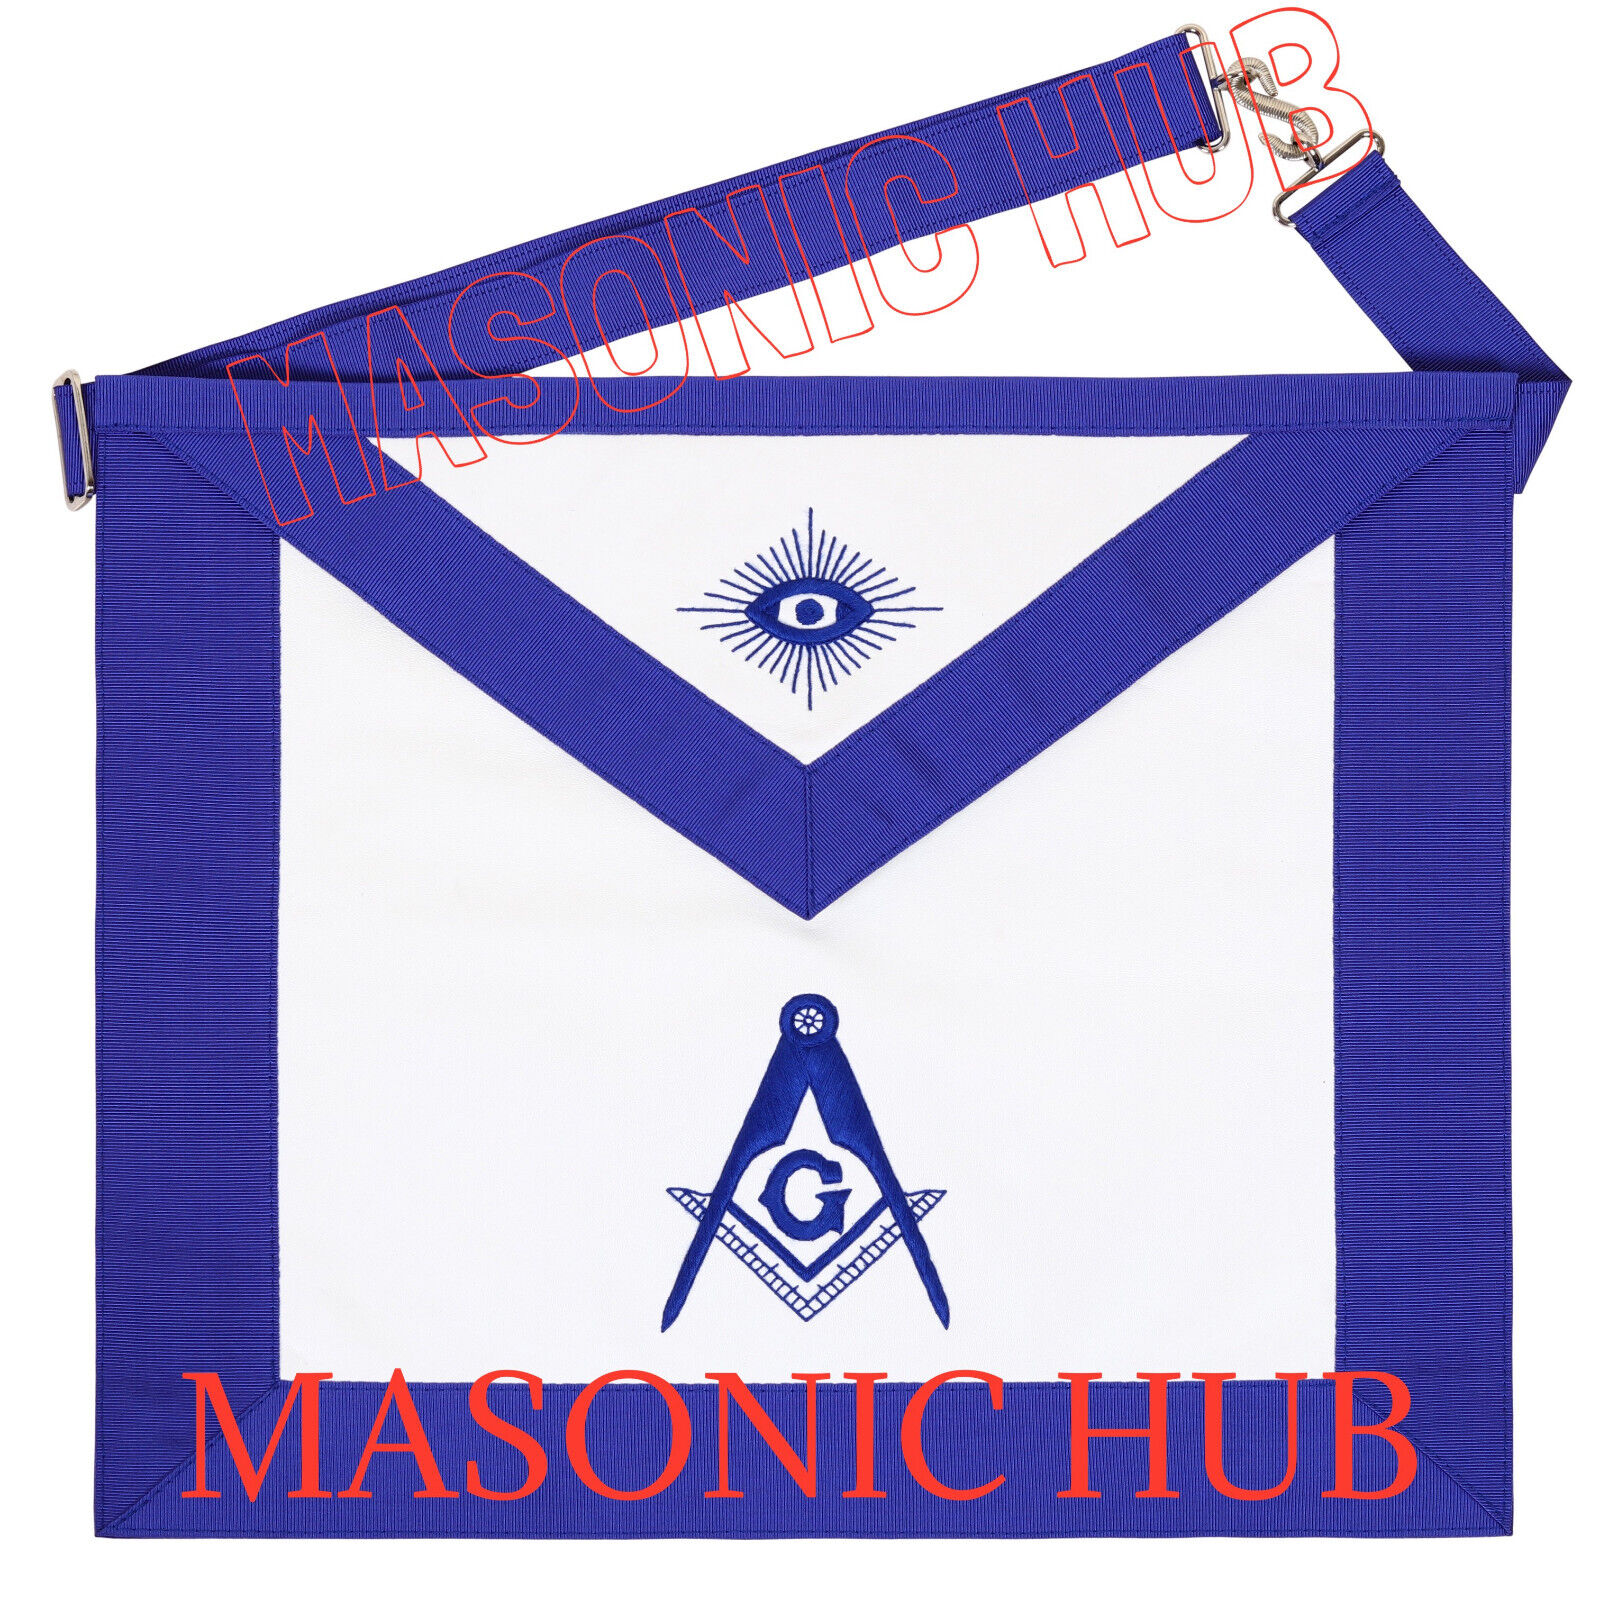 Handmade 100% Lambskin Blue Lodge Apron with Compass and Square for Freemasonry